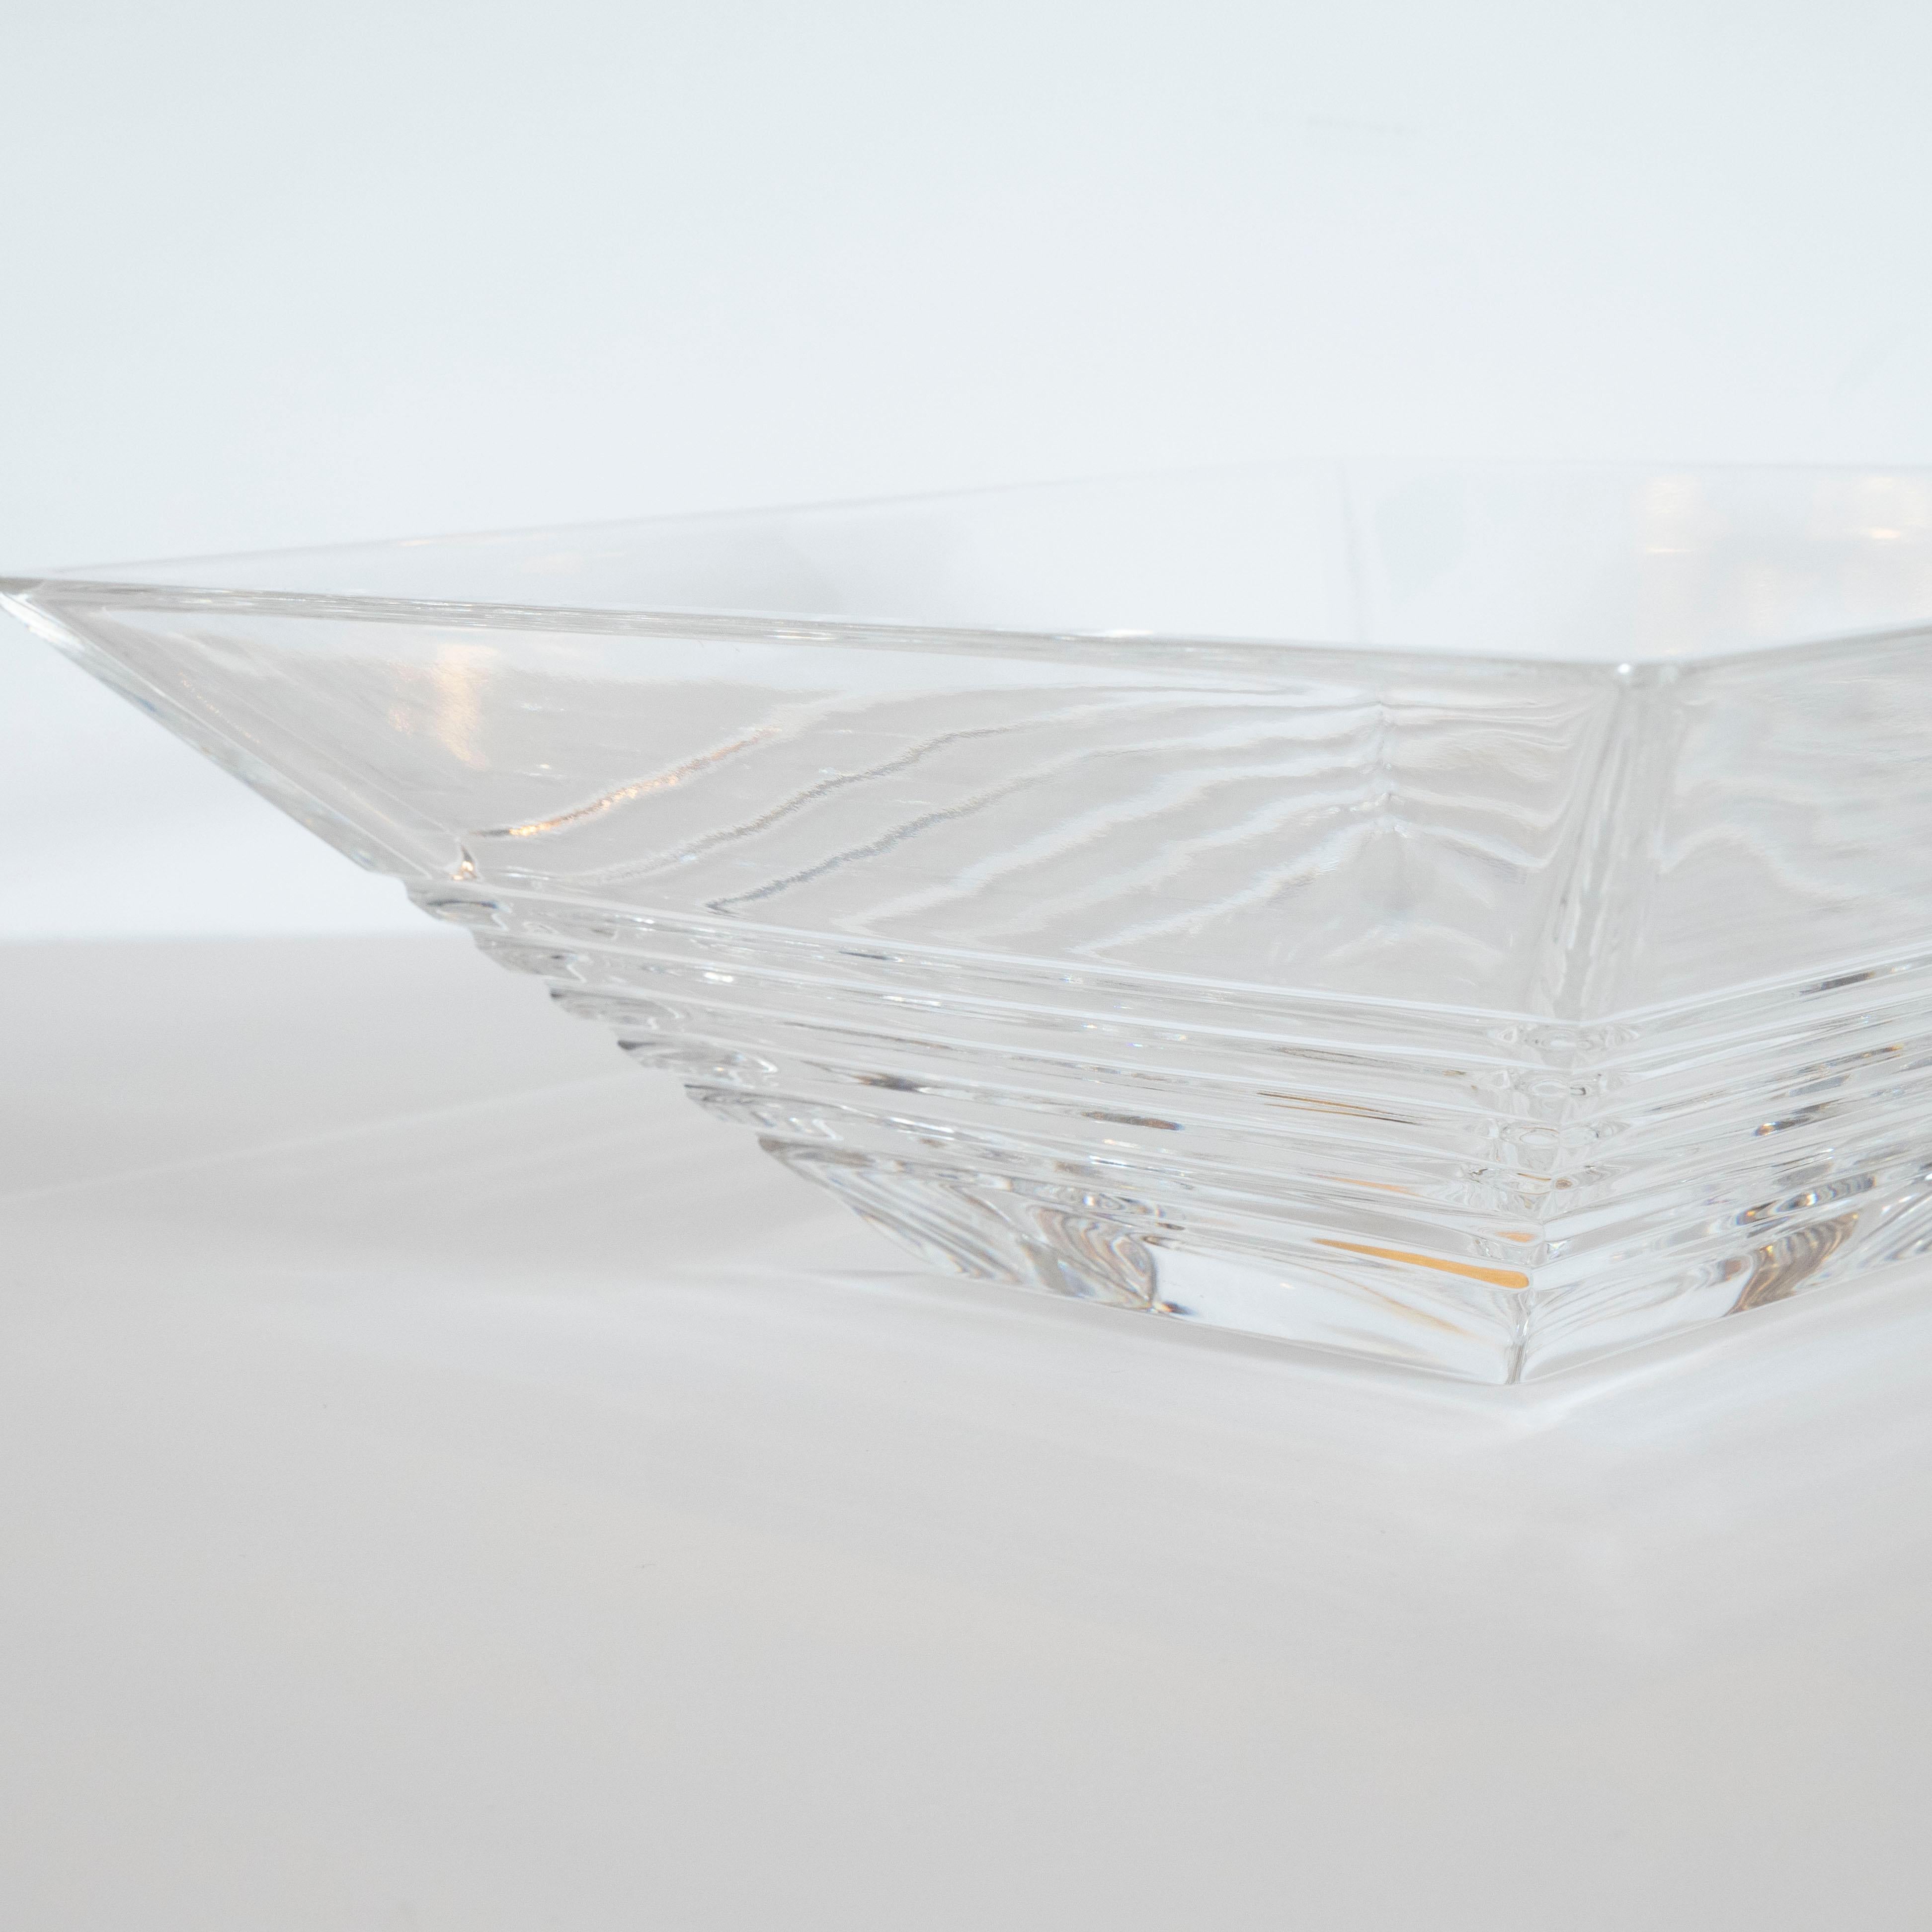 Art Deco Style Stepped Translucent Crystal Decorative Bowl by Tiffany & Co. 1